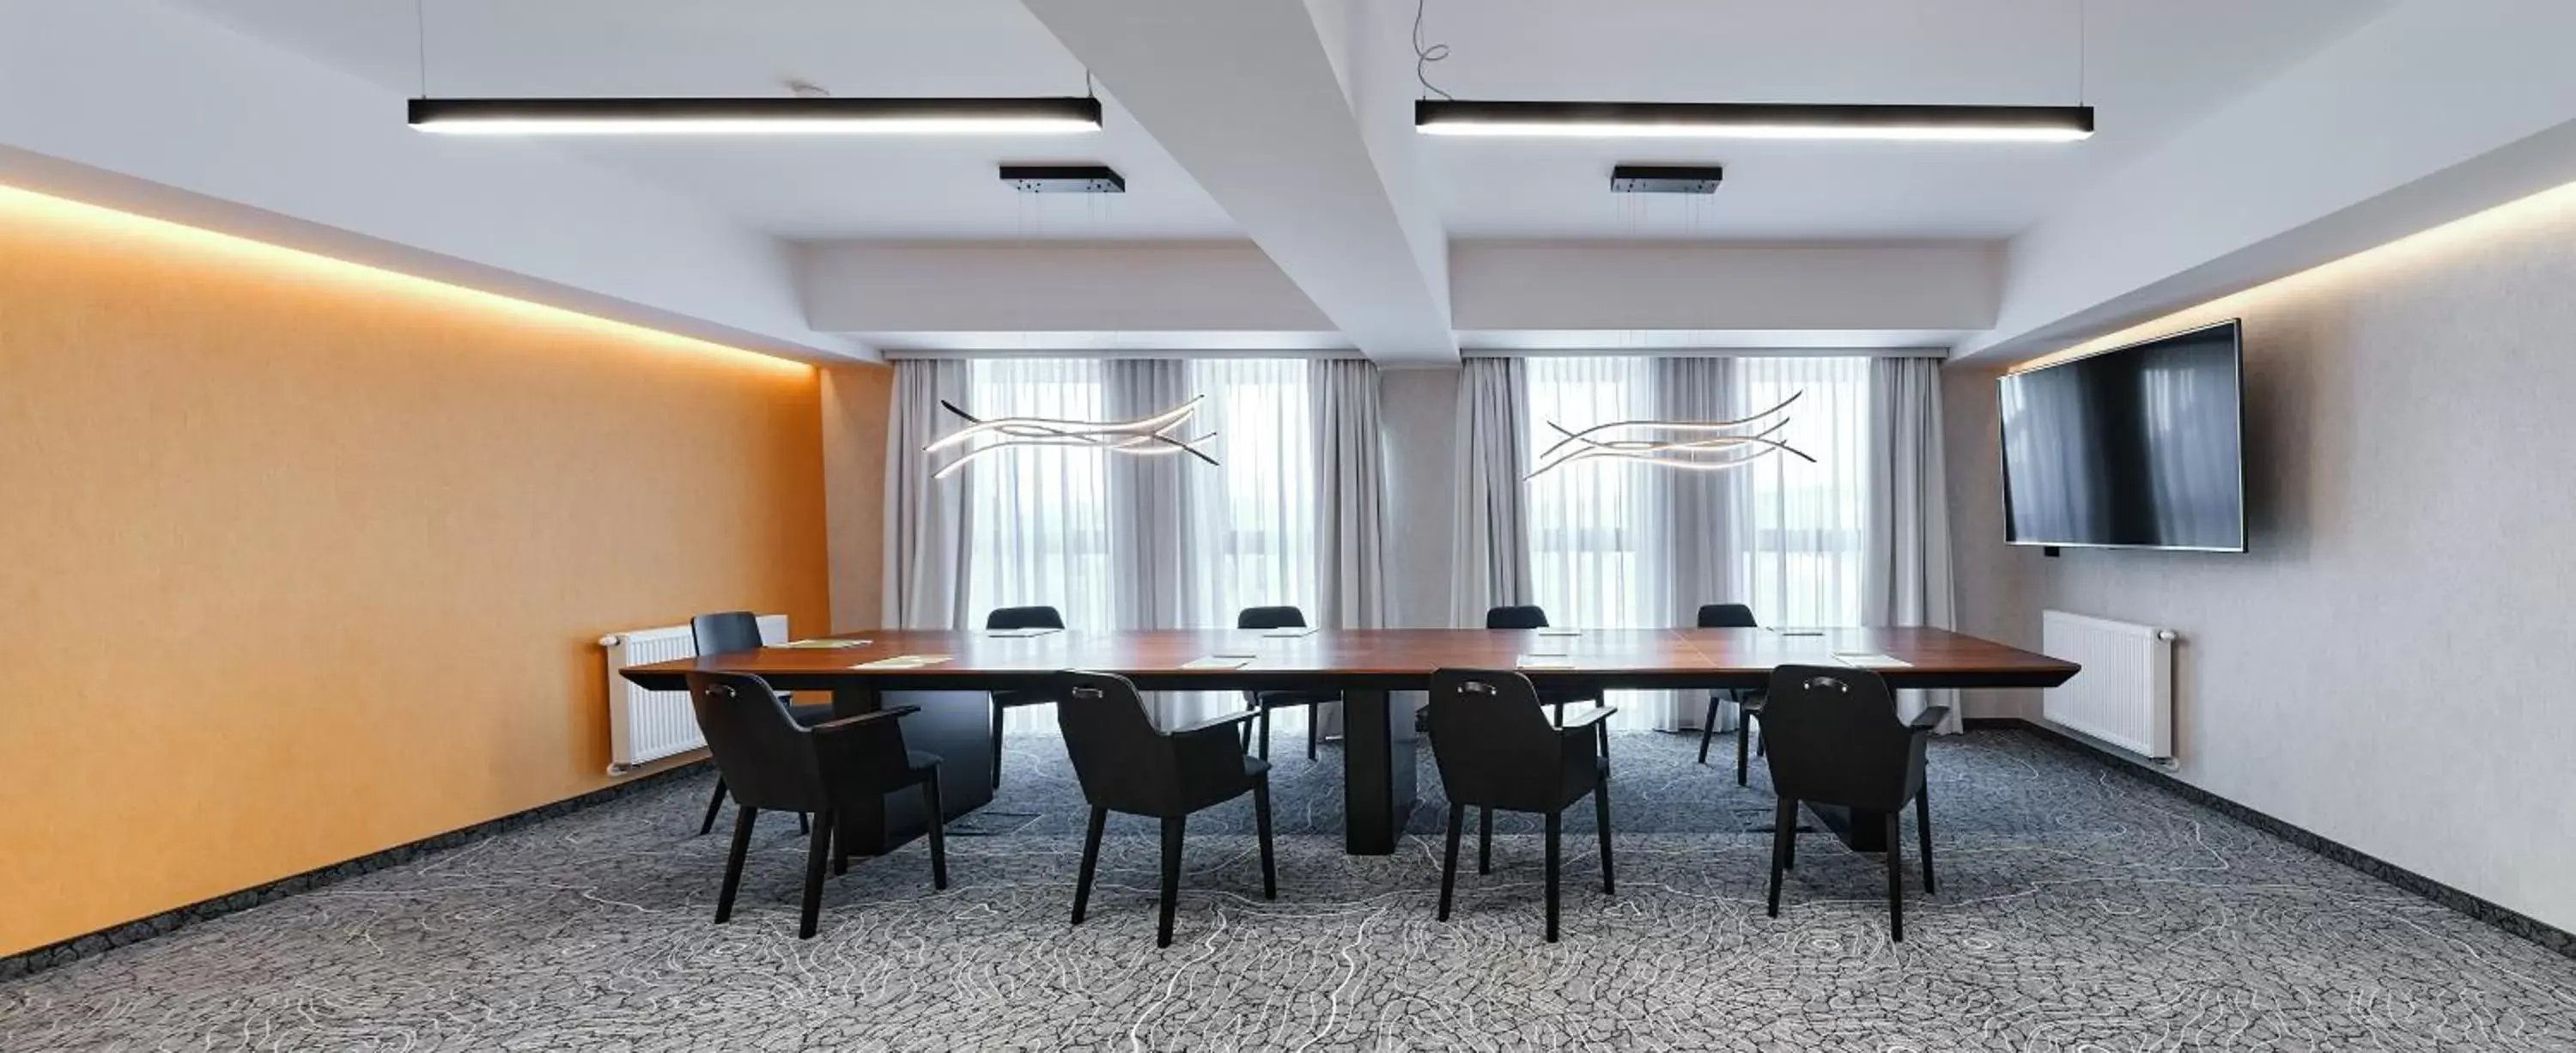 Business facilities in ibis Styles Nowy Targ